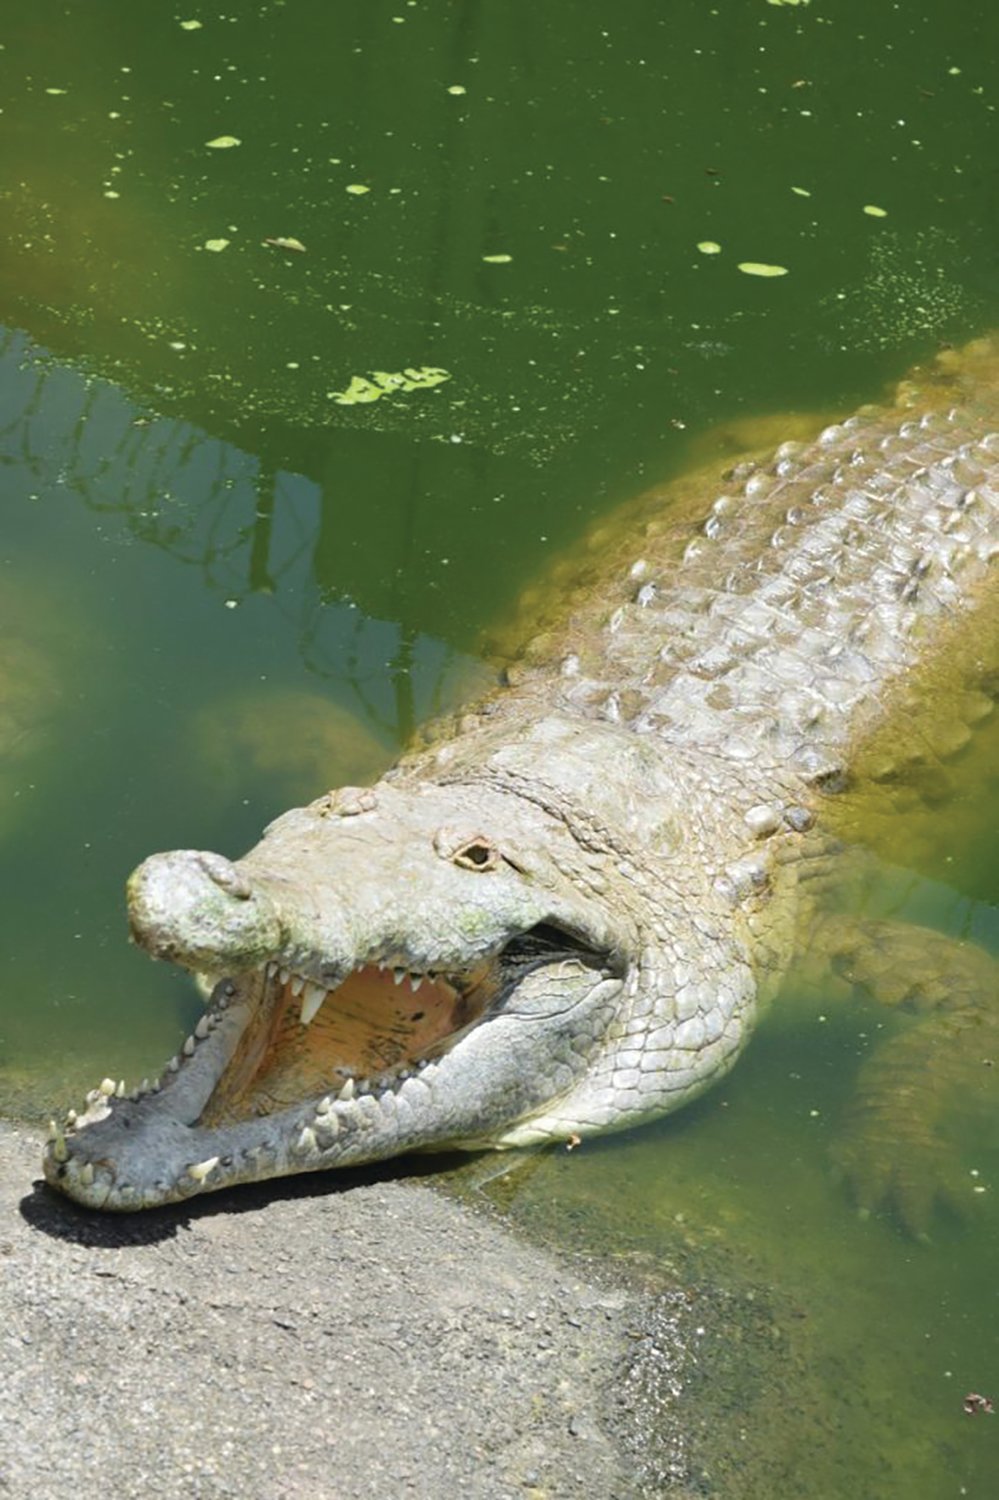 The Orinoco crocodile is one of the most threatened crocodilian species in the Americas due mainly to overhunting and habitat degradation. UF/IFAS scientists with the CROC Docs in Fort Lauderdale are leading a reintroduction project in Colombia to conserve the species.